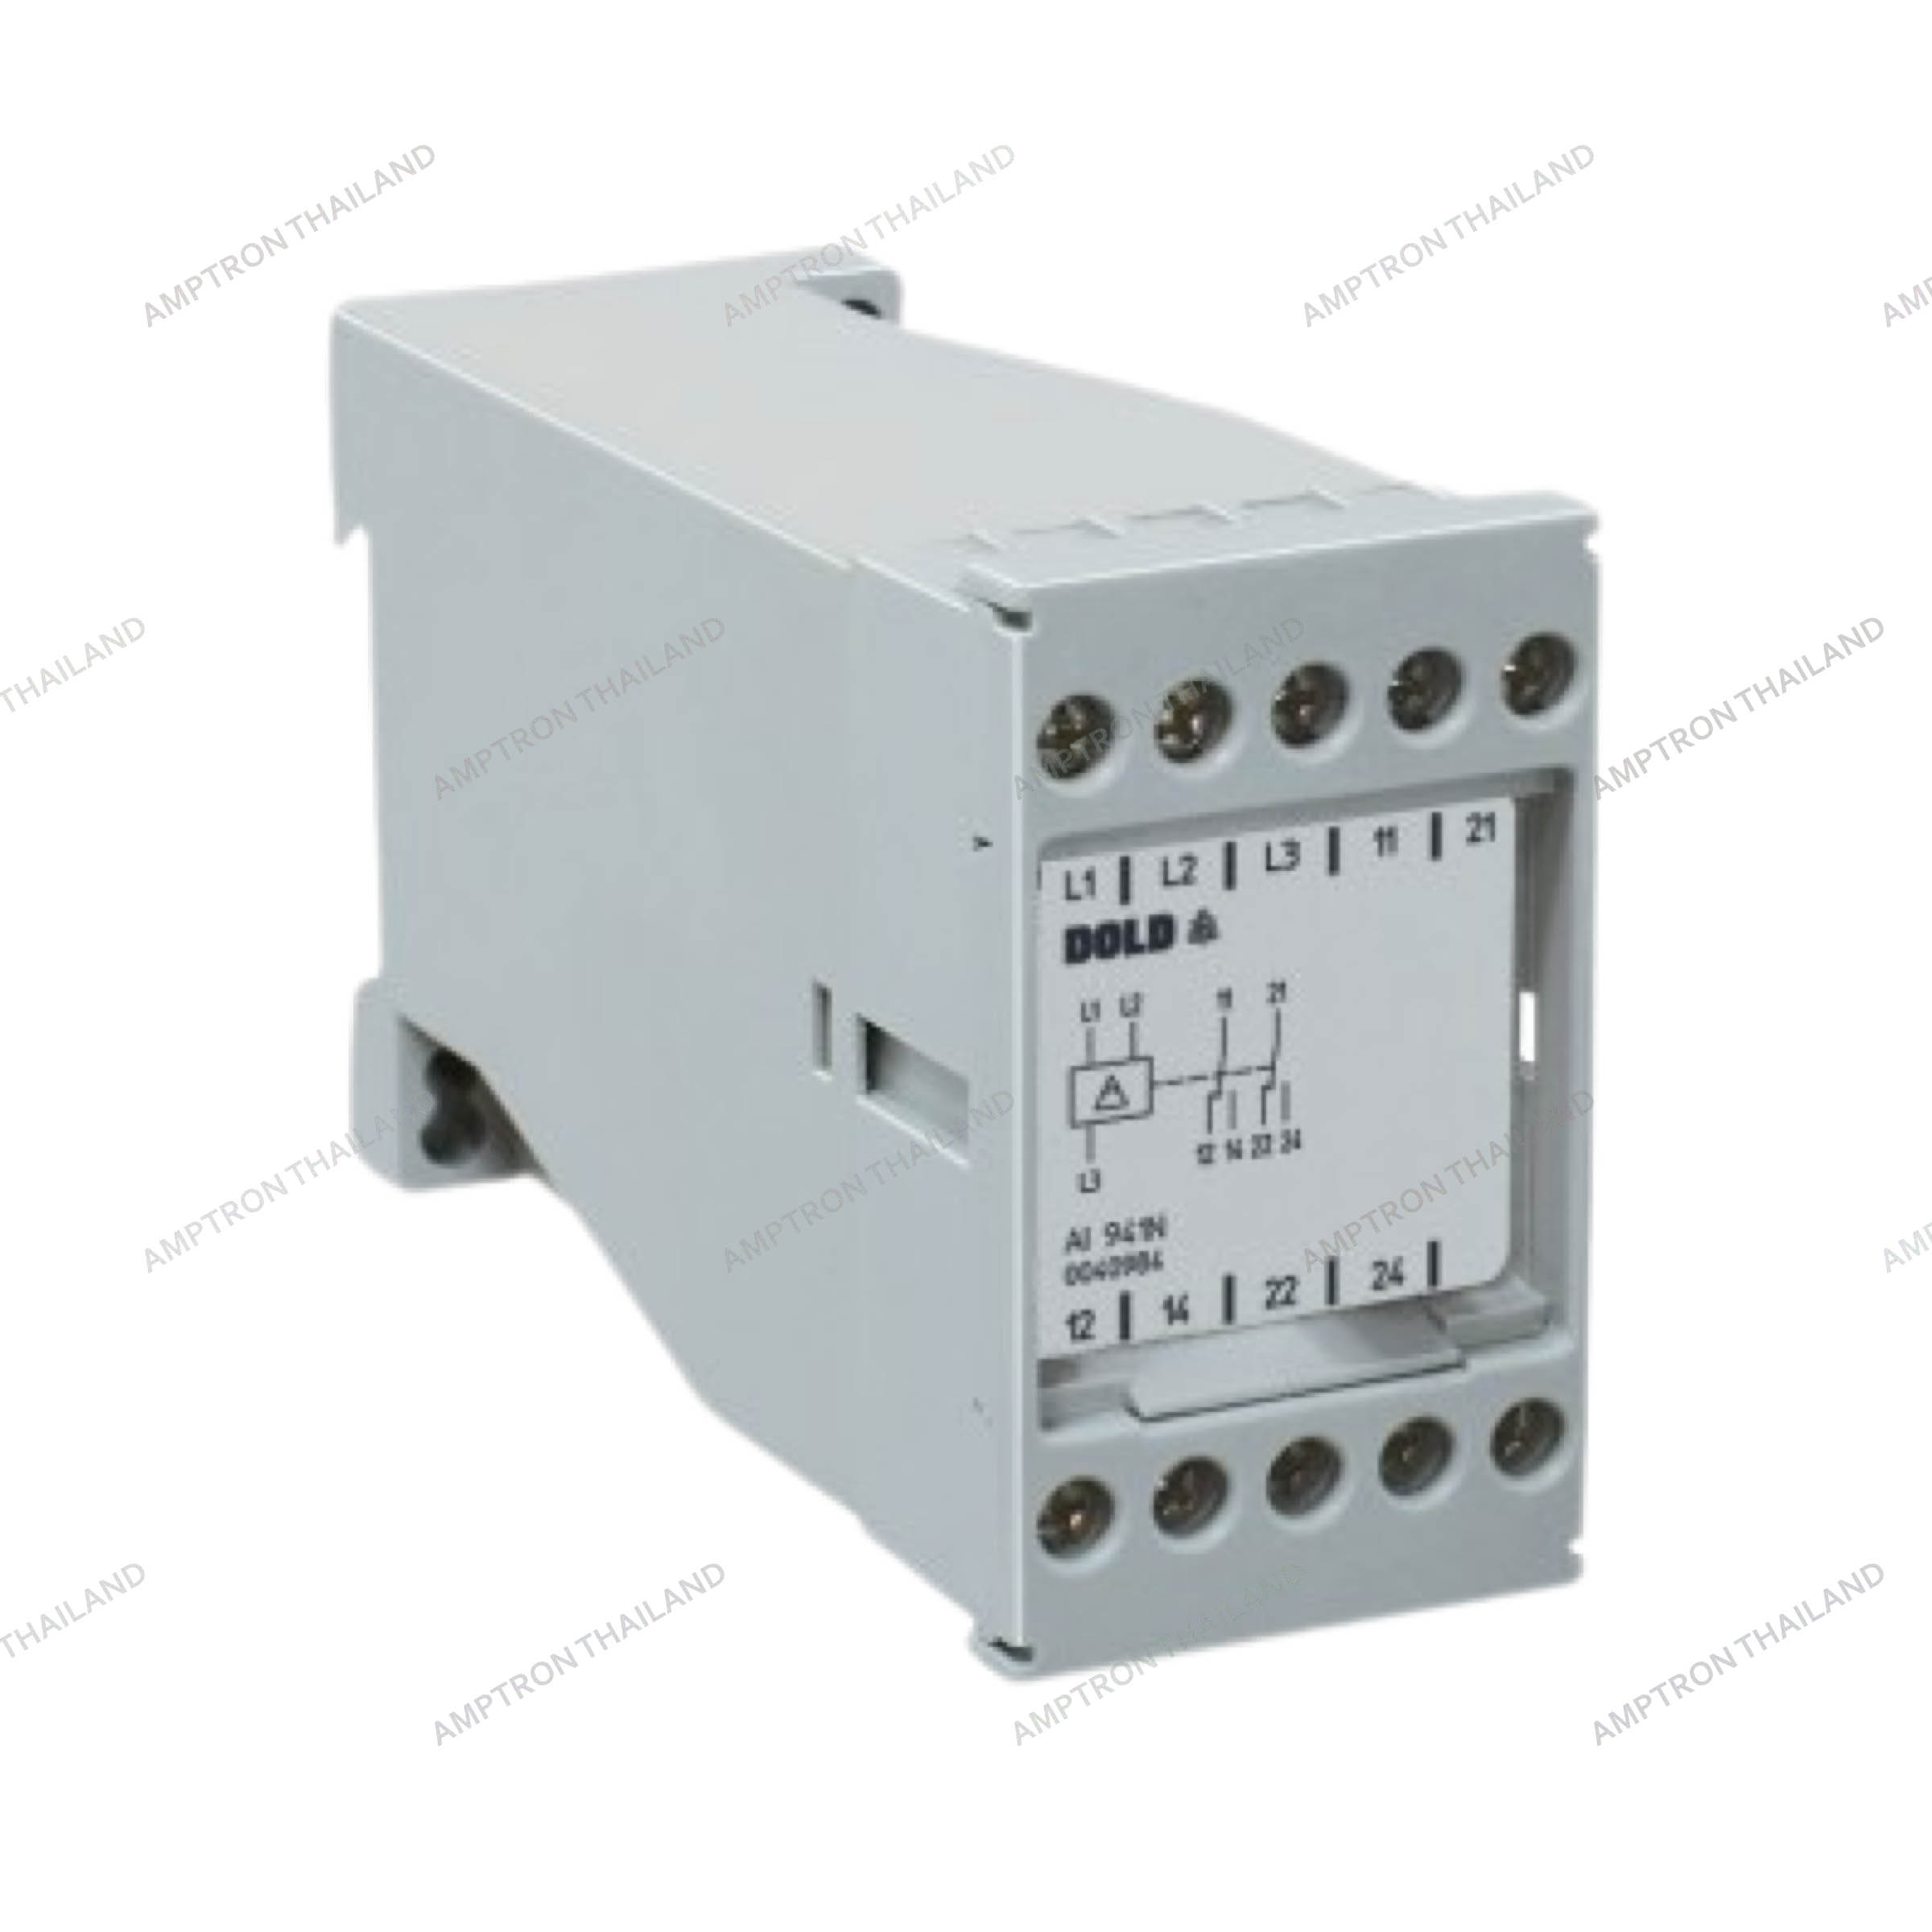 AI 941N Varimeter Phase Sequence Relay